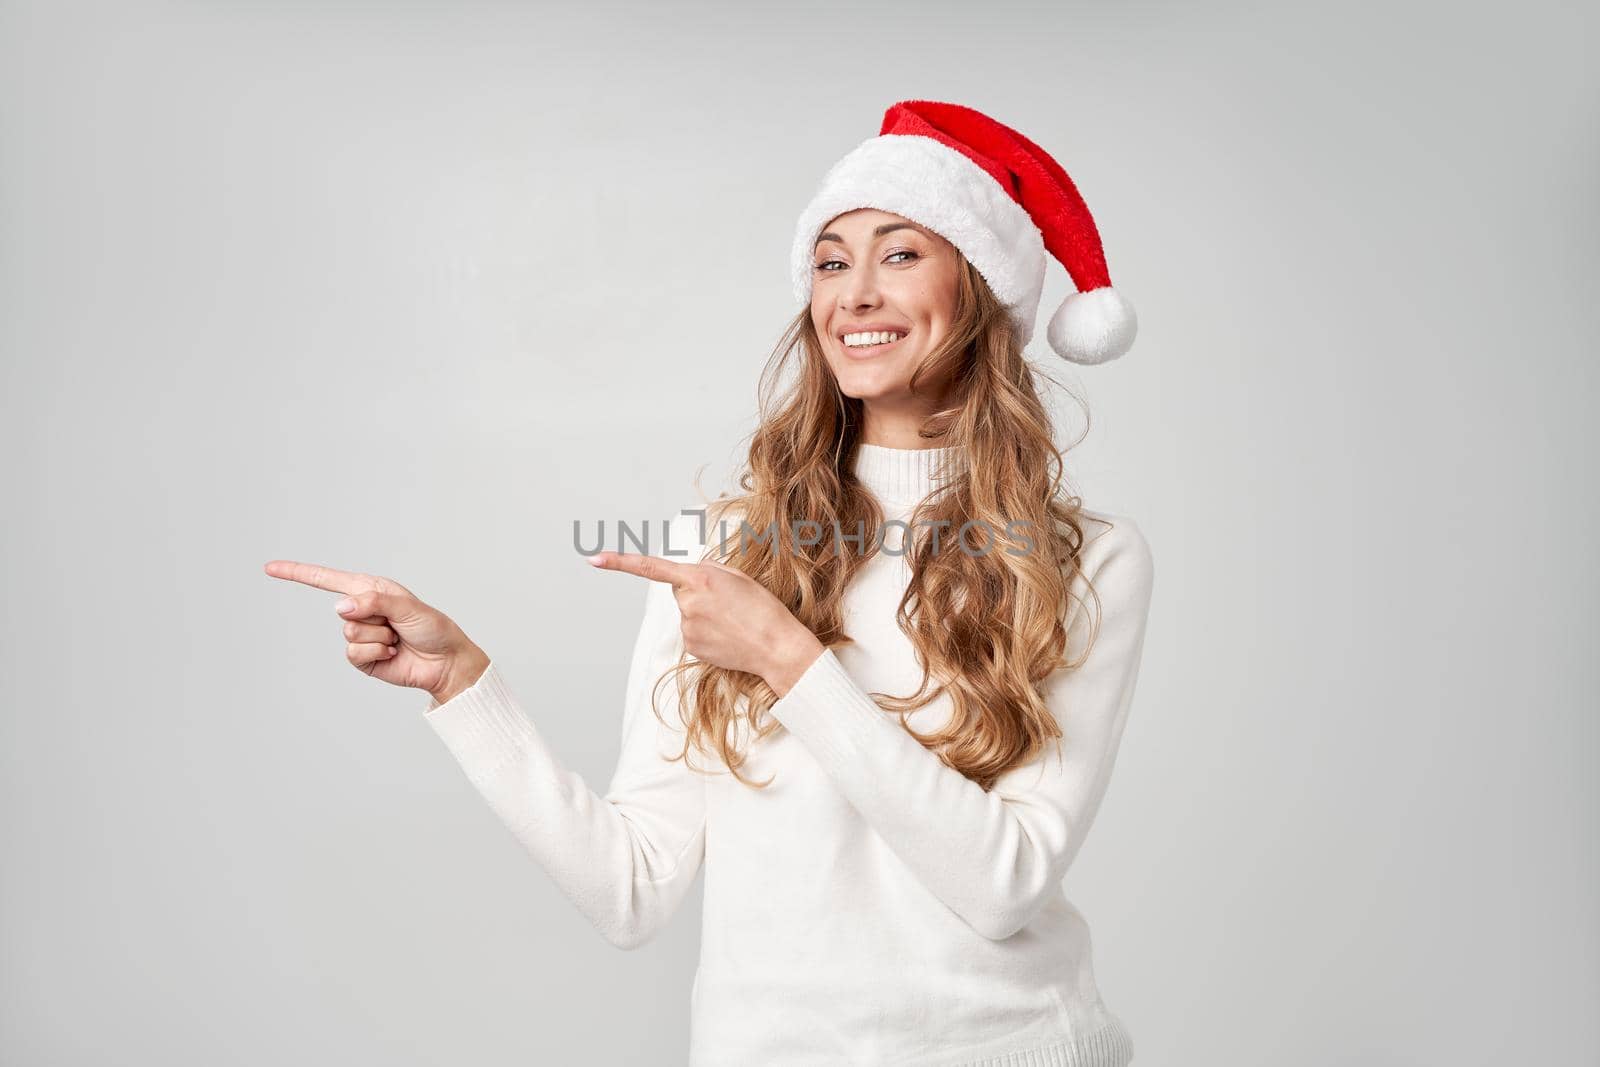 Woman christmas Santa Hat sweater white studio background Beautiful caucasian female curly hair portrait Happy person positive emotion Holiday concept Shows finger on side cope space for advertise